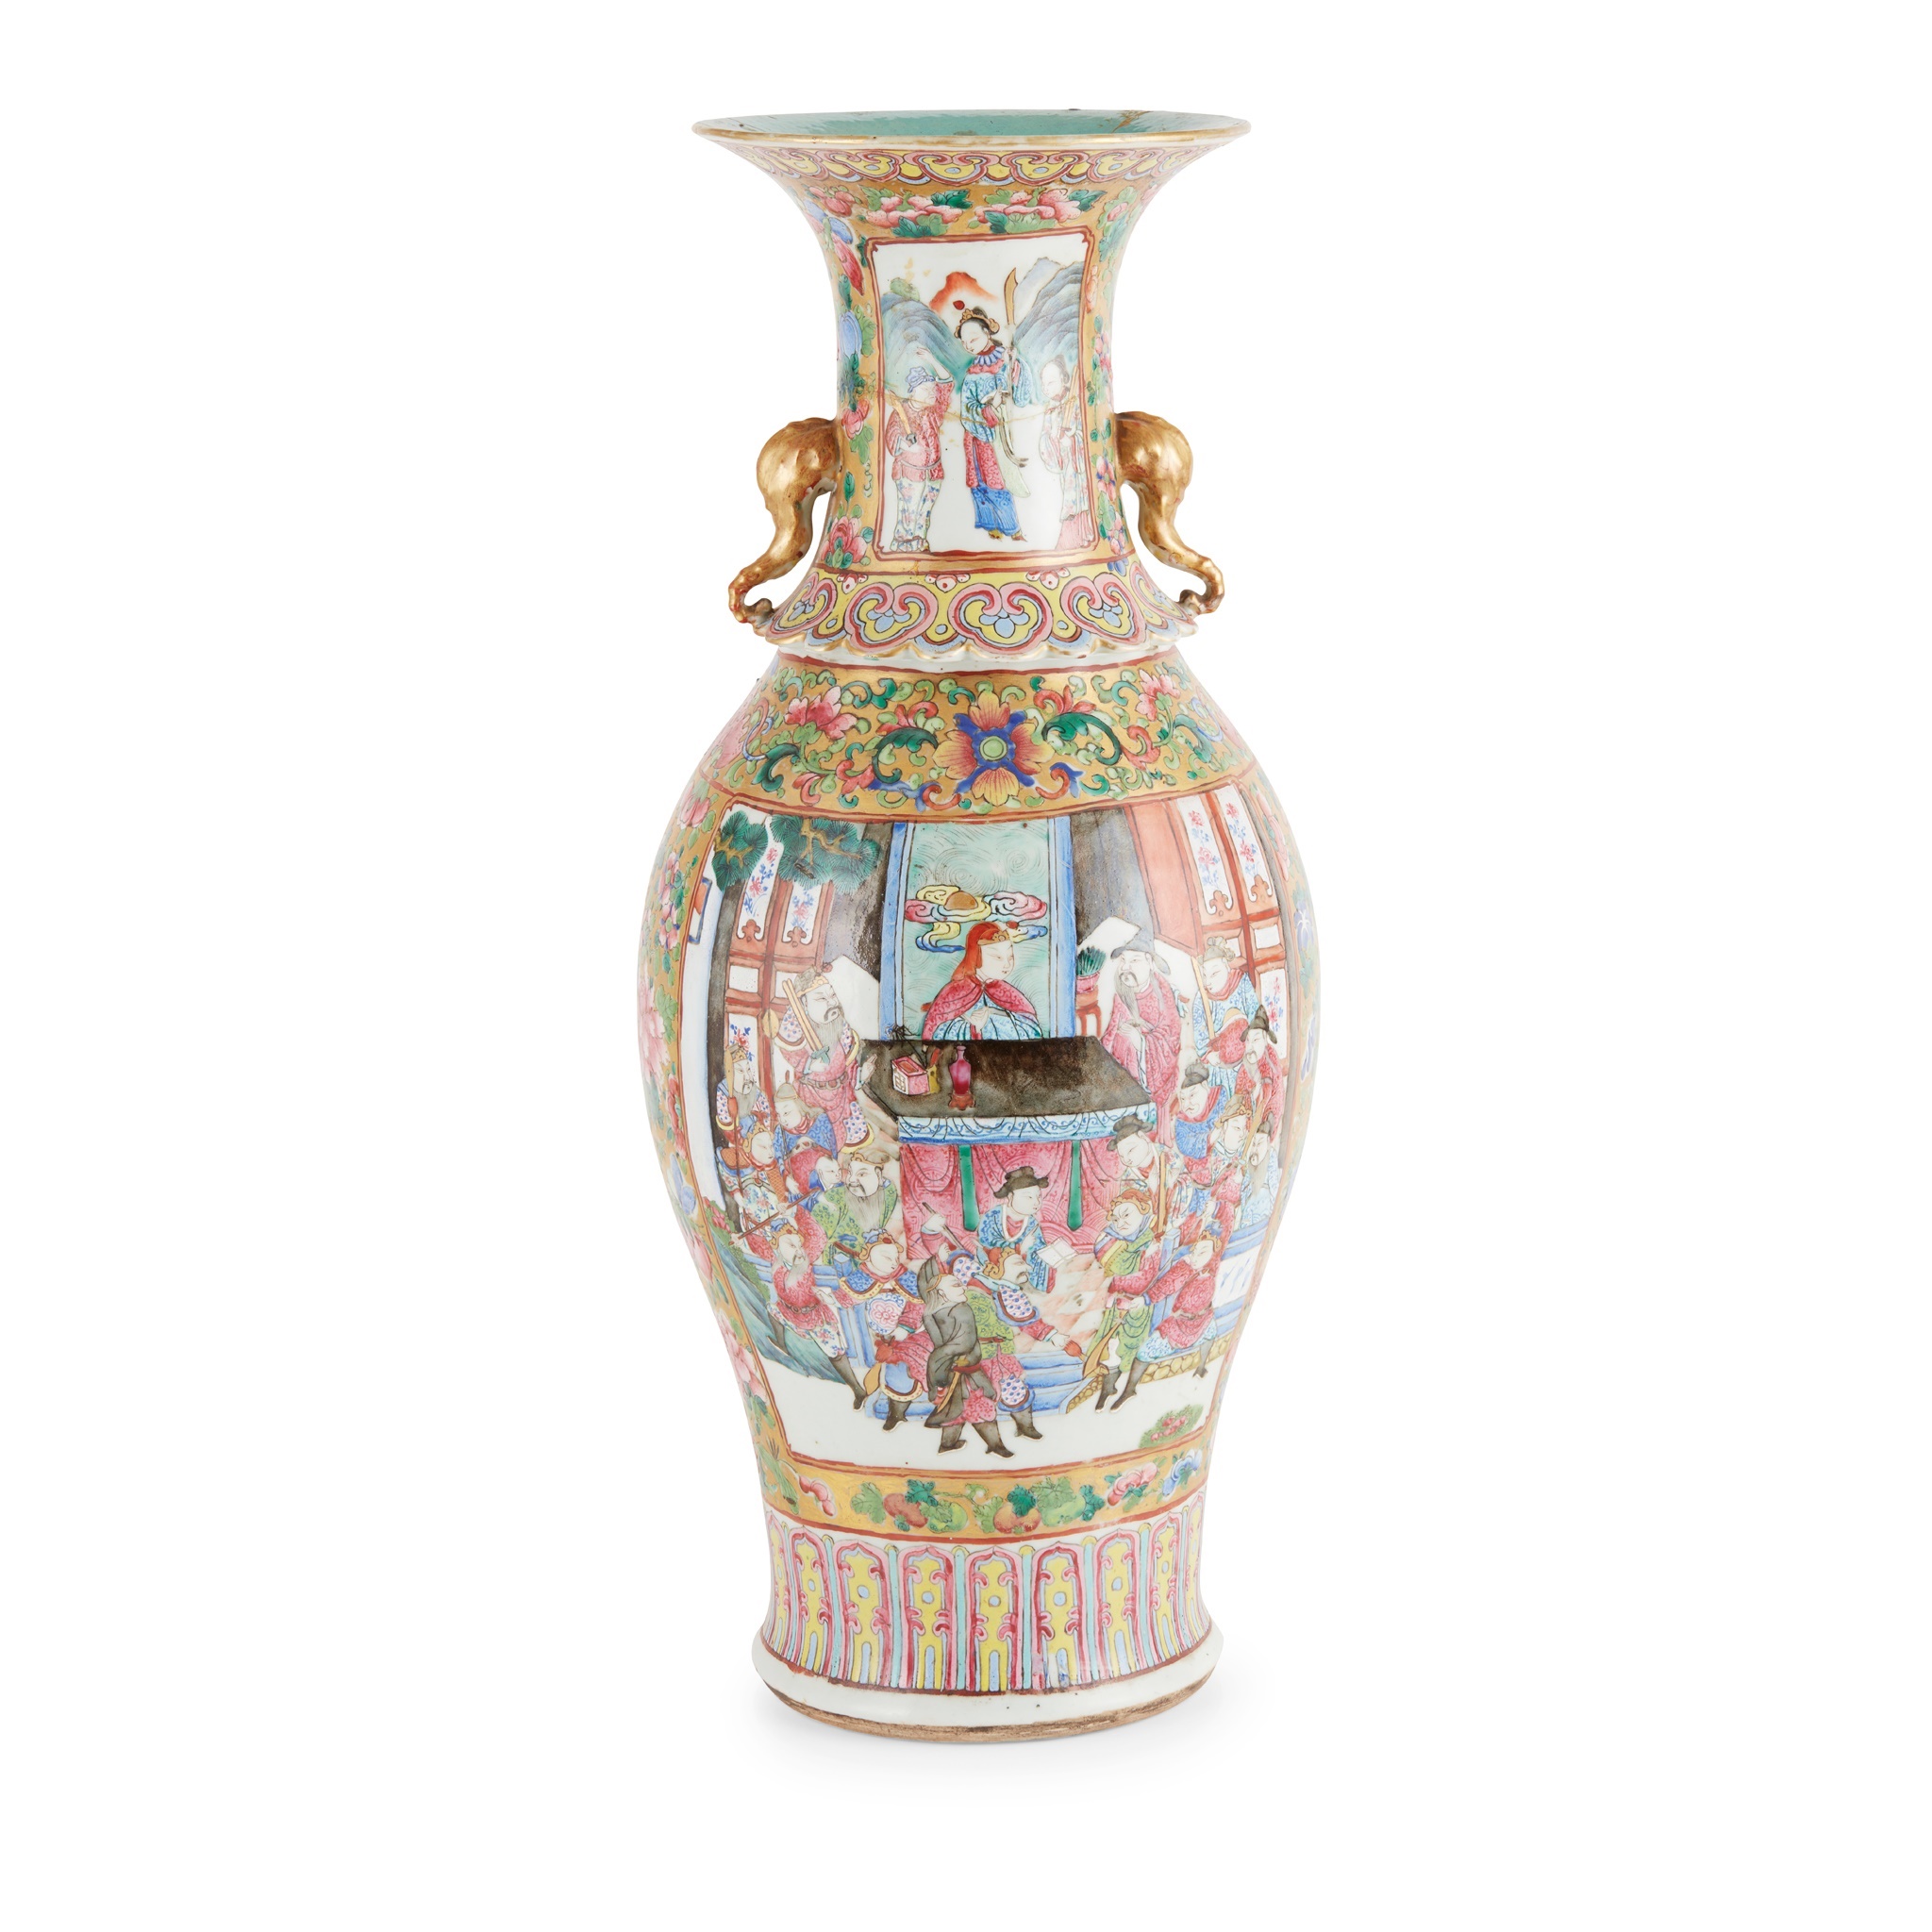 LOT 216 | LARGE CANTON FAMILLE ROSE 'WARRIOR' BALUSTER VASE | QING DYNASTY, 19TH CENTURY 清 廣彩開光人物紋象耳大瓶 | £300 - £500 + fees